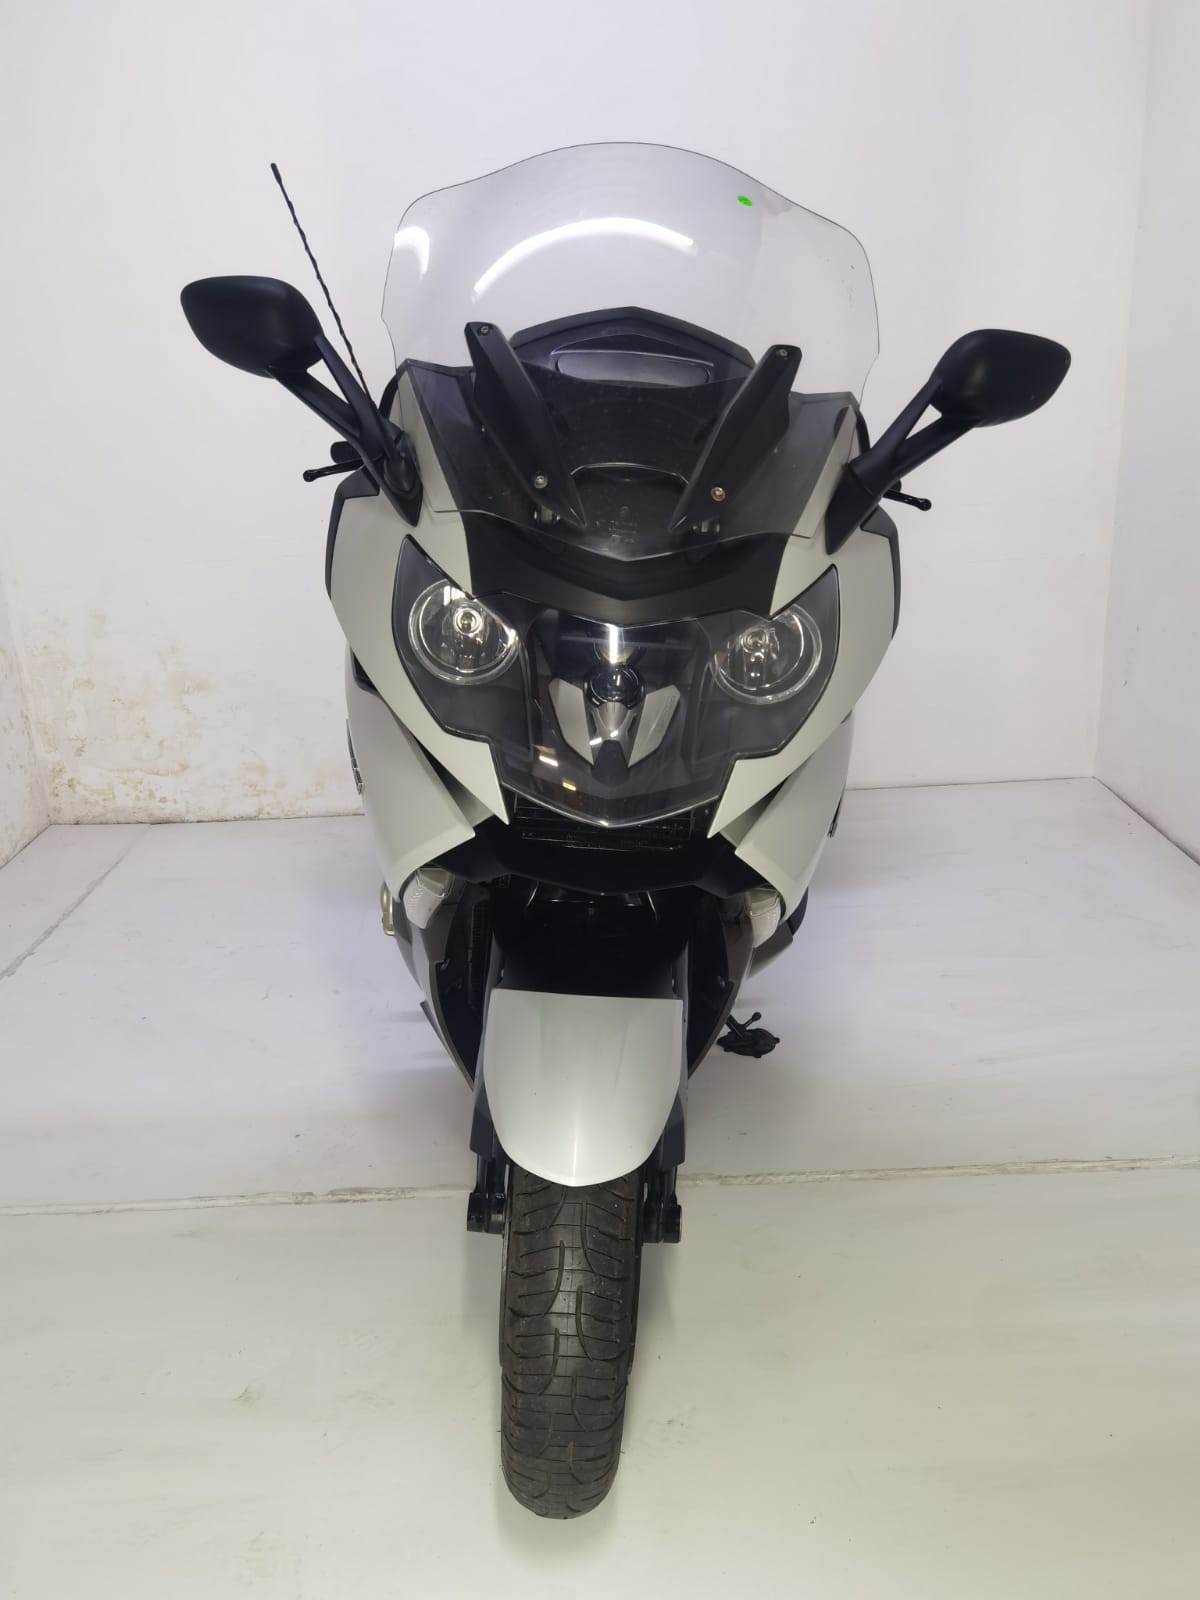 2012 BMW K 1600 GT (Finance Available)